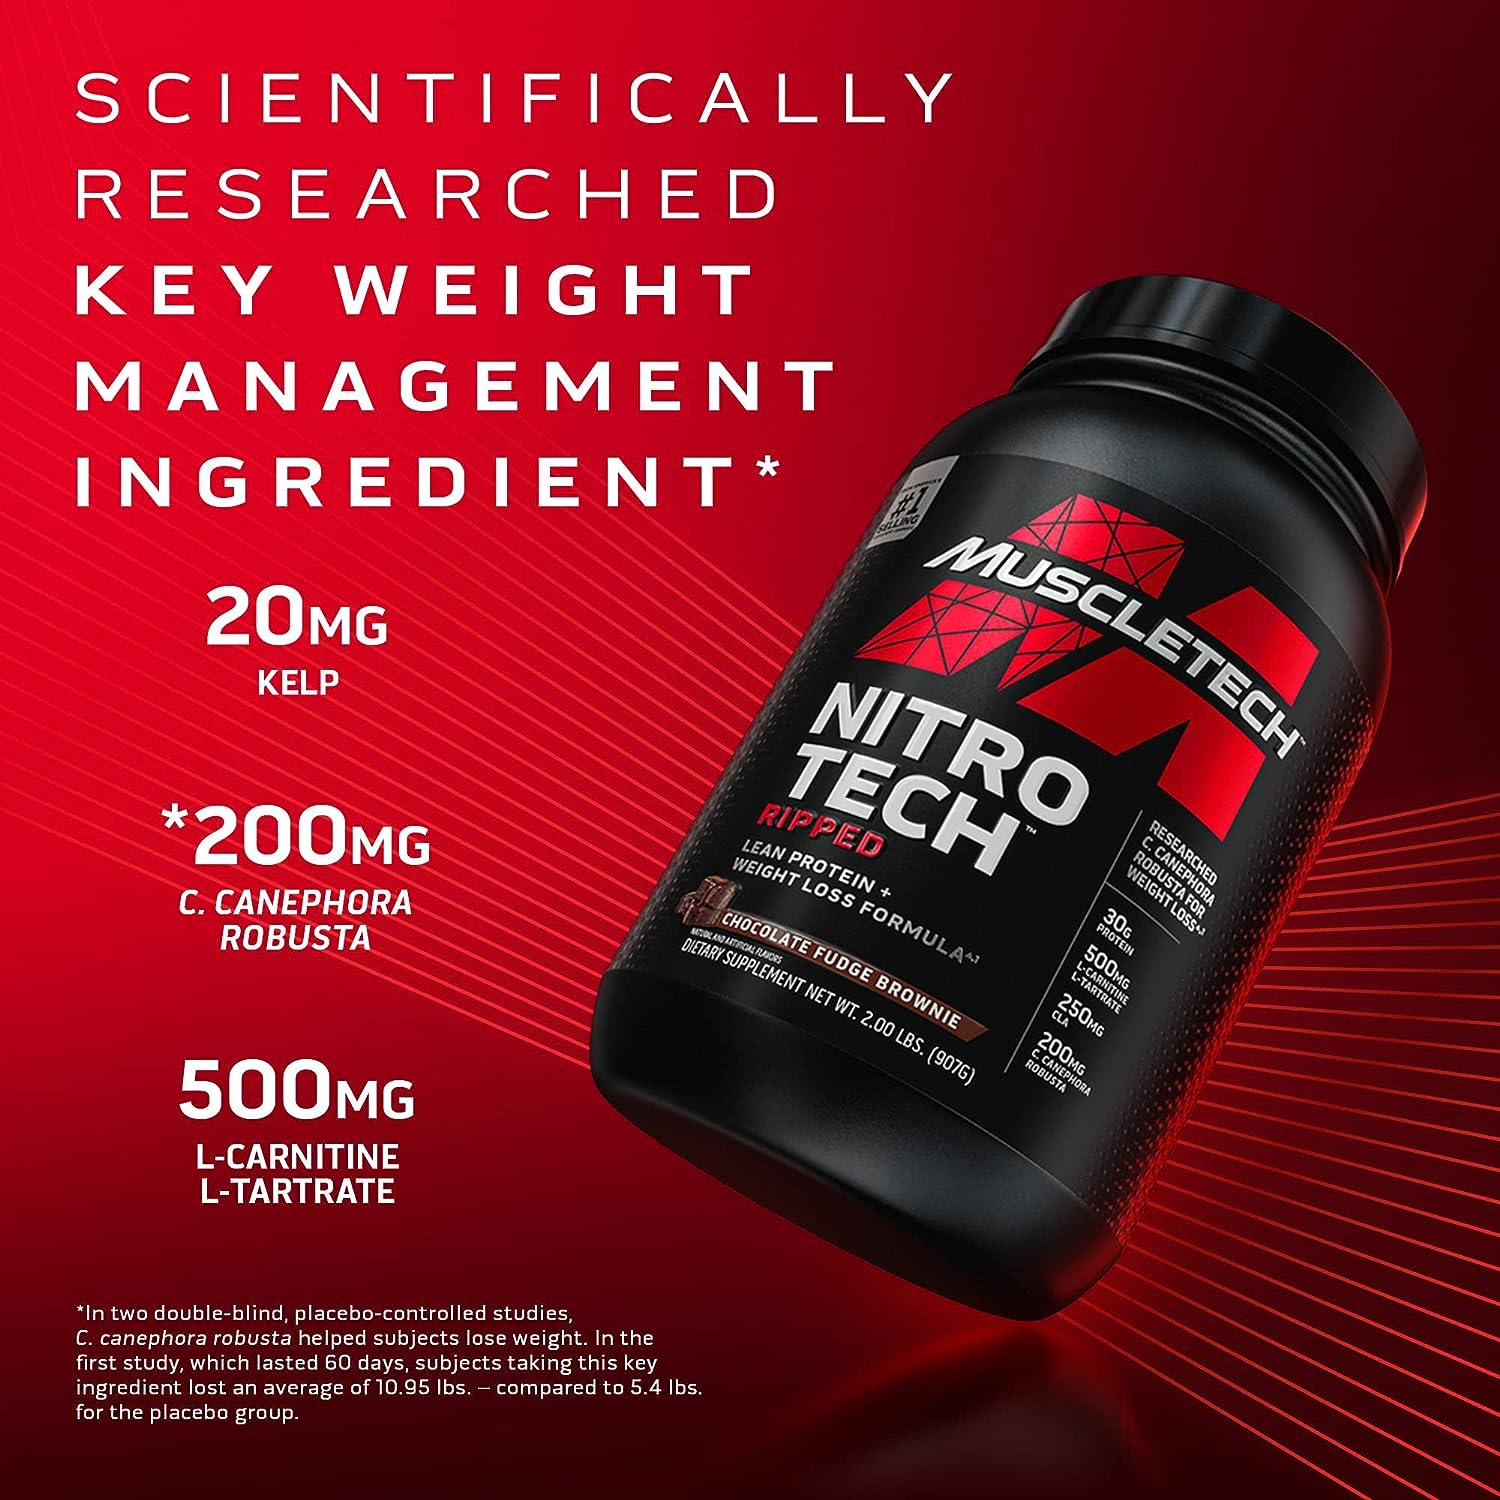 MuscleTech Nitro-Tech Ripped | Lean Protein + Weight Loss | Isolate, Concentrate & Peptides | 30g Protein 500mg L-Carnitine Chocolate Fudge Brownie 1.82 KG